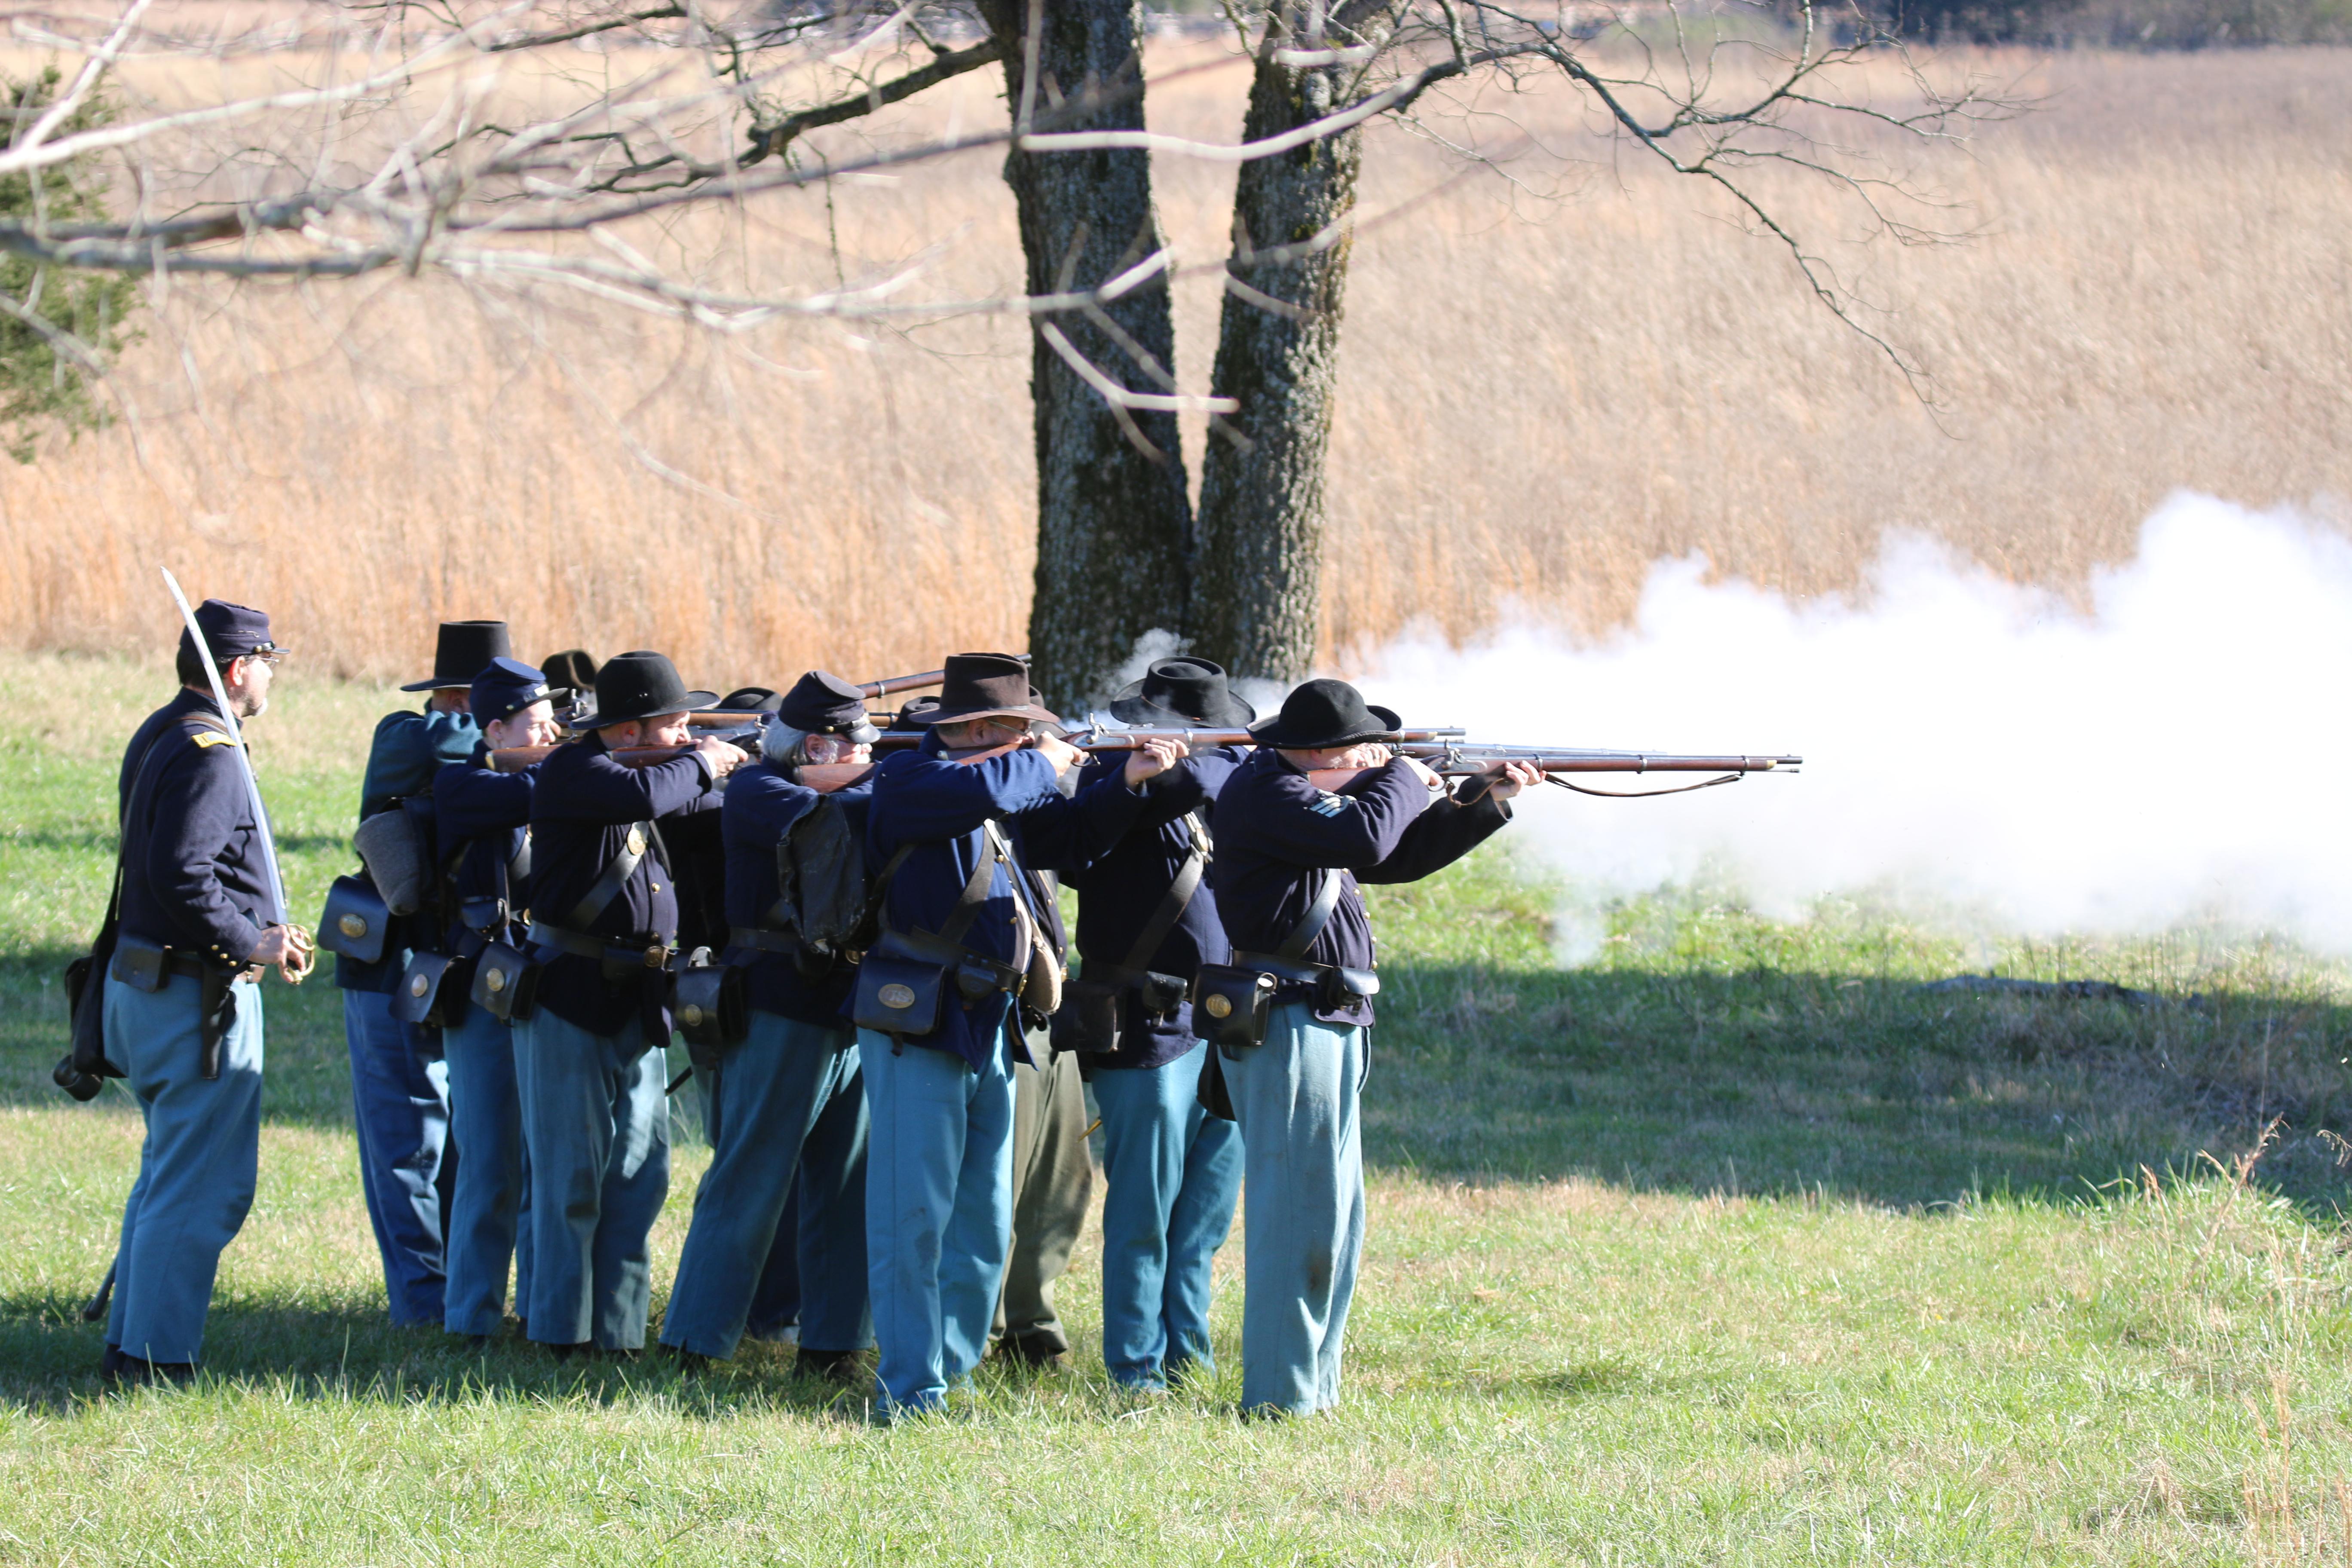 Union soldiers fire muskets.